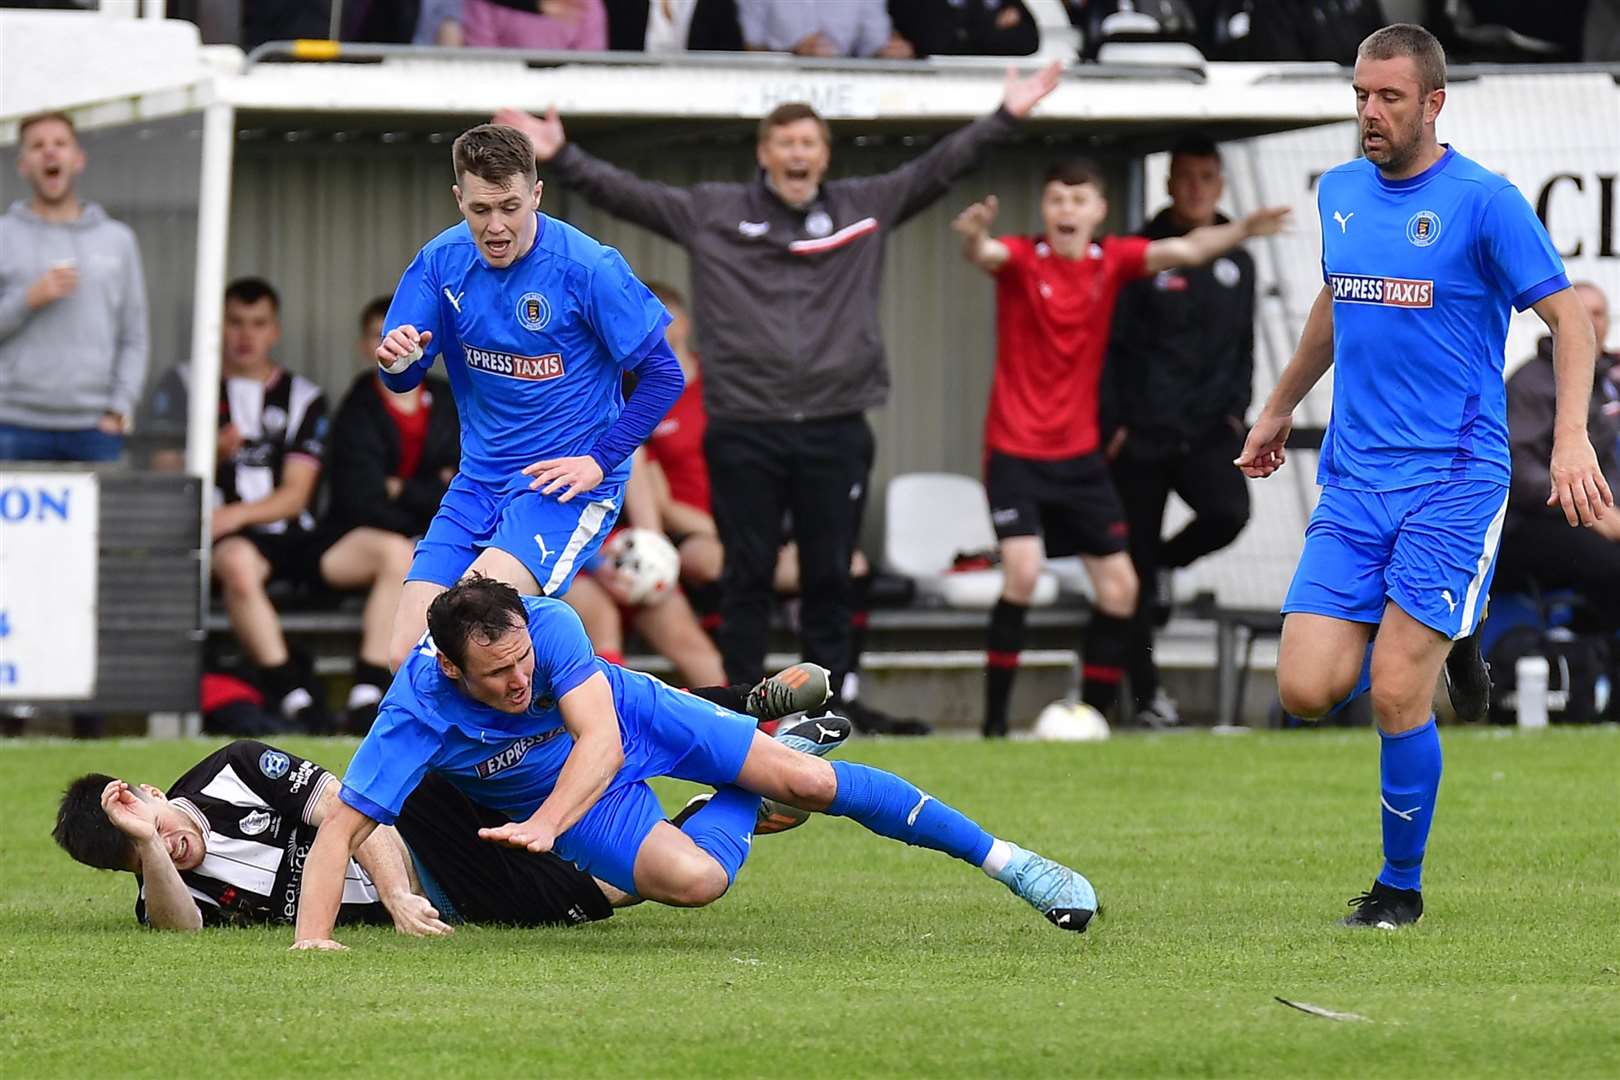 Wick substitute Sean Campbell is taken down by Jamie McCormack in the incident that led to the Bo'ness United defender being sent off. Picture: Mel Roger